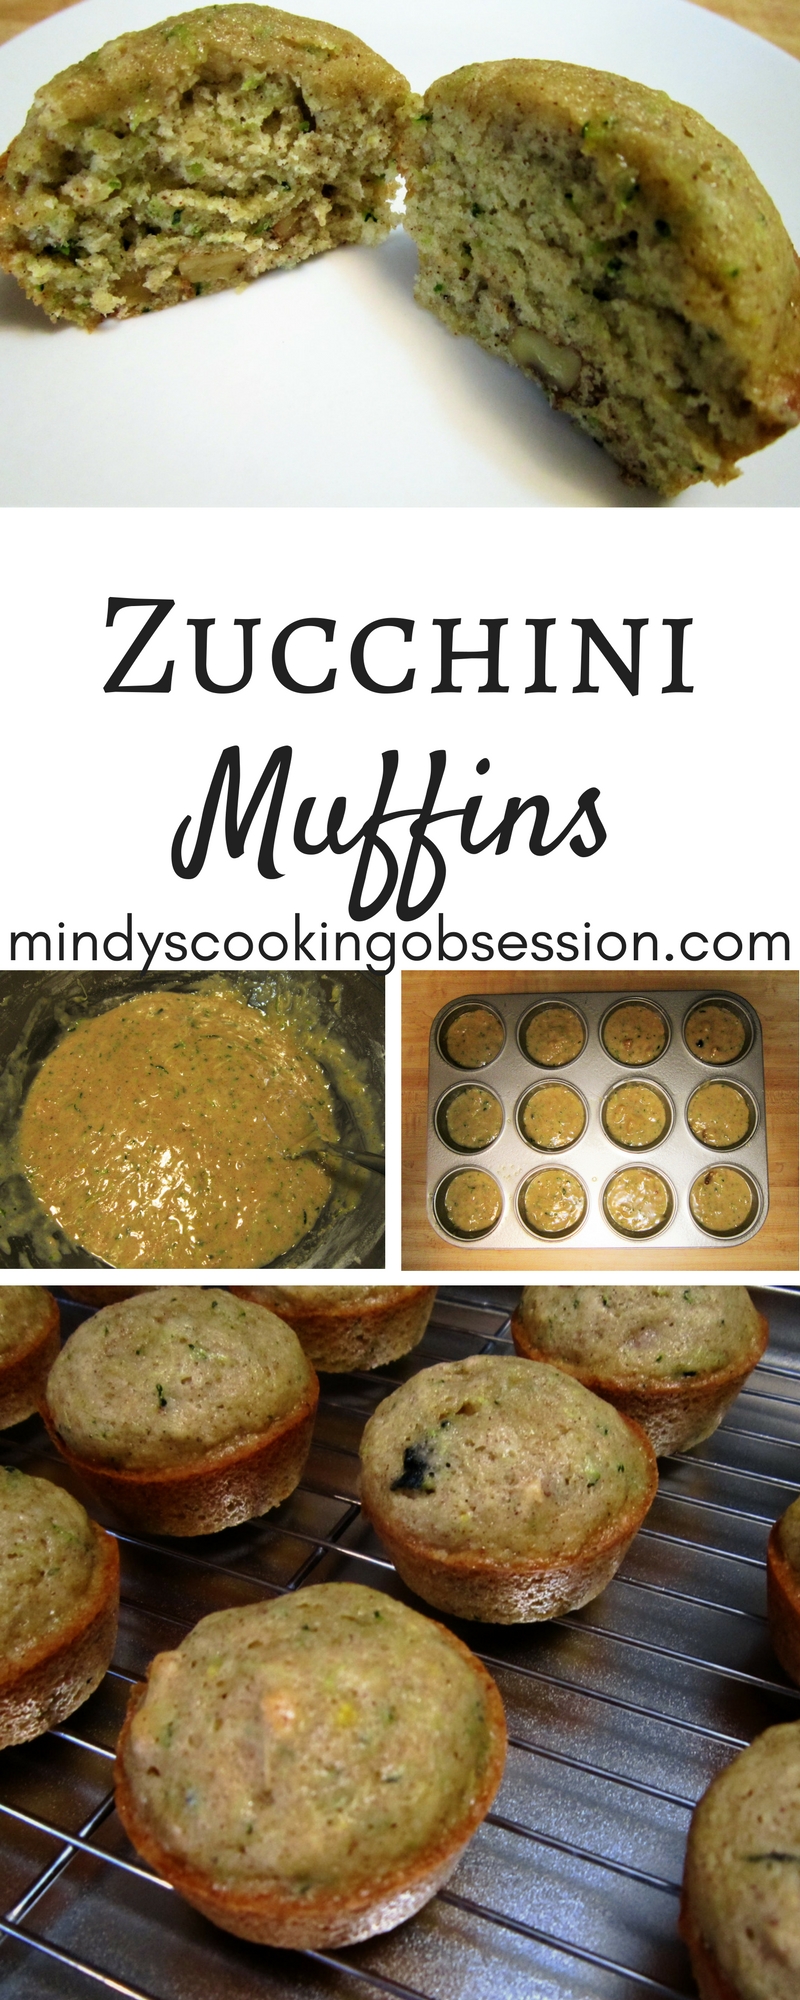 these zucchini muffins are delicious and easy.